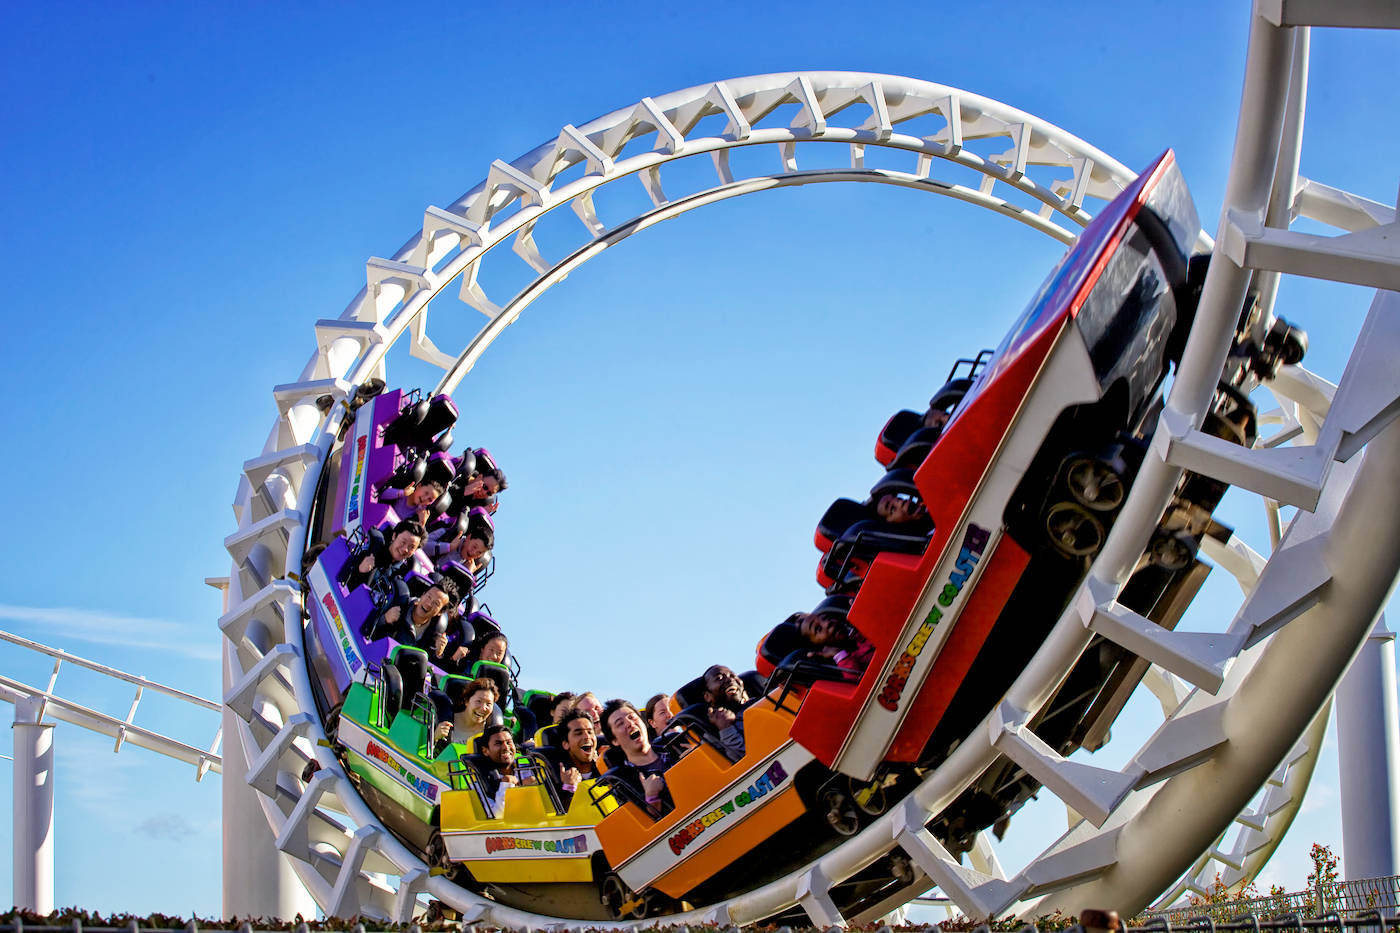 Are roller coasters safe?